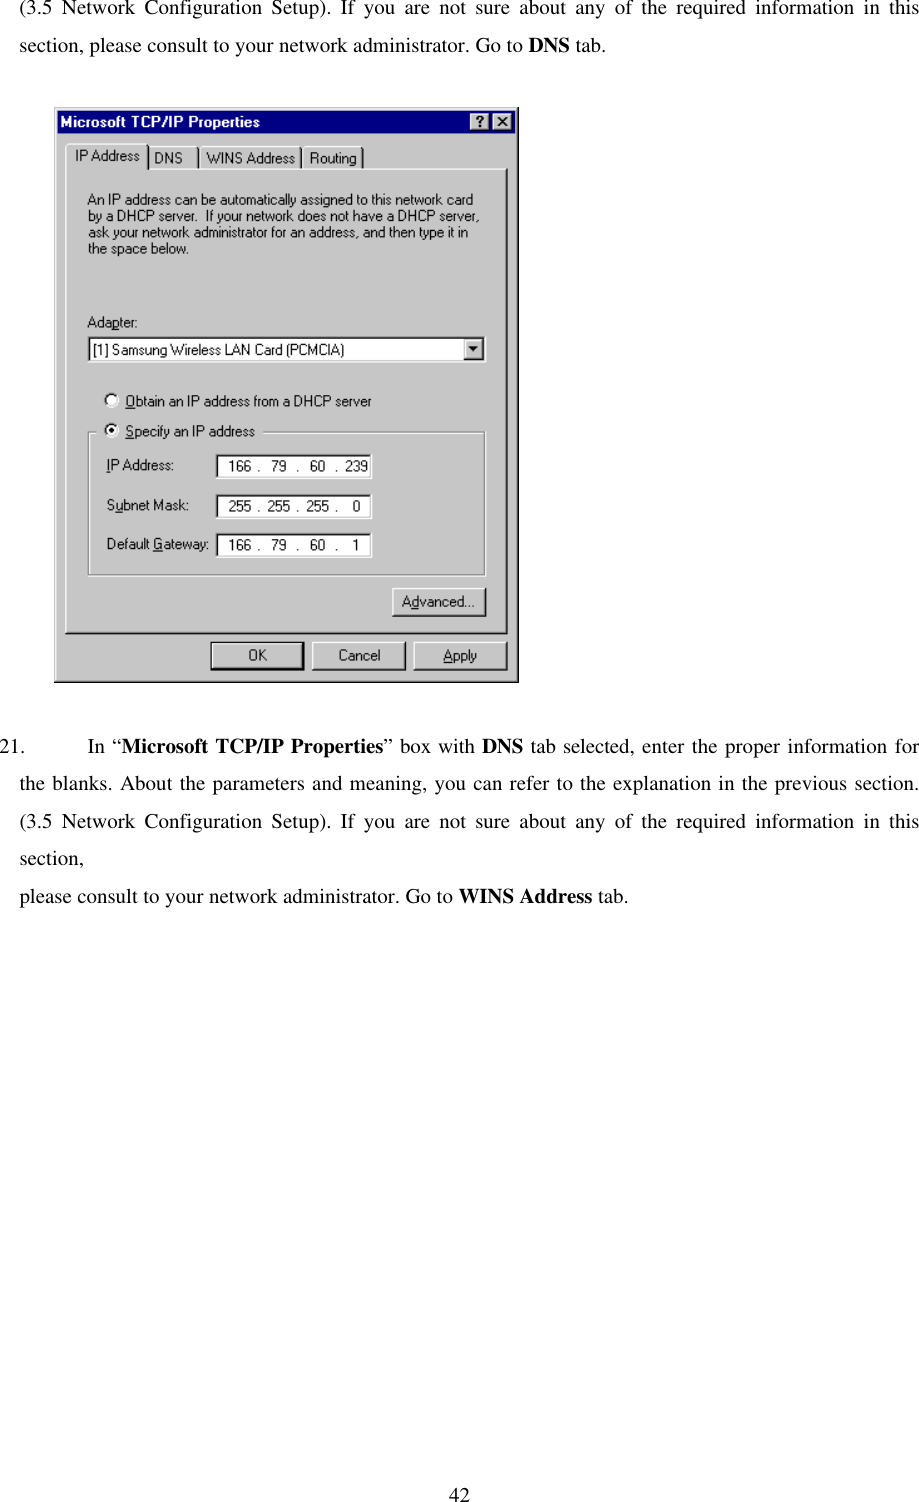 42(3.5 Network Configuration Setup). If you are not sure about any of the required information in thissection, please consult to your network administrator. Go to DNS tab.          21. In “Microsoft TCP/IP Properties” box with DNS tab selected, enter the proper information forthe blanks. About the parameters and meaning, you can refer to the explanation in the previous section.(3.5 Network Configuration Setup). If you are not sure about any of the required information in thissection,please consult to your network administrator. Go to WINS Address tab.